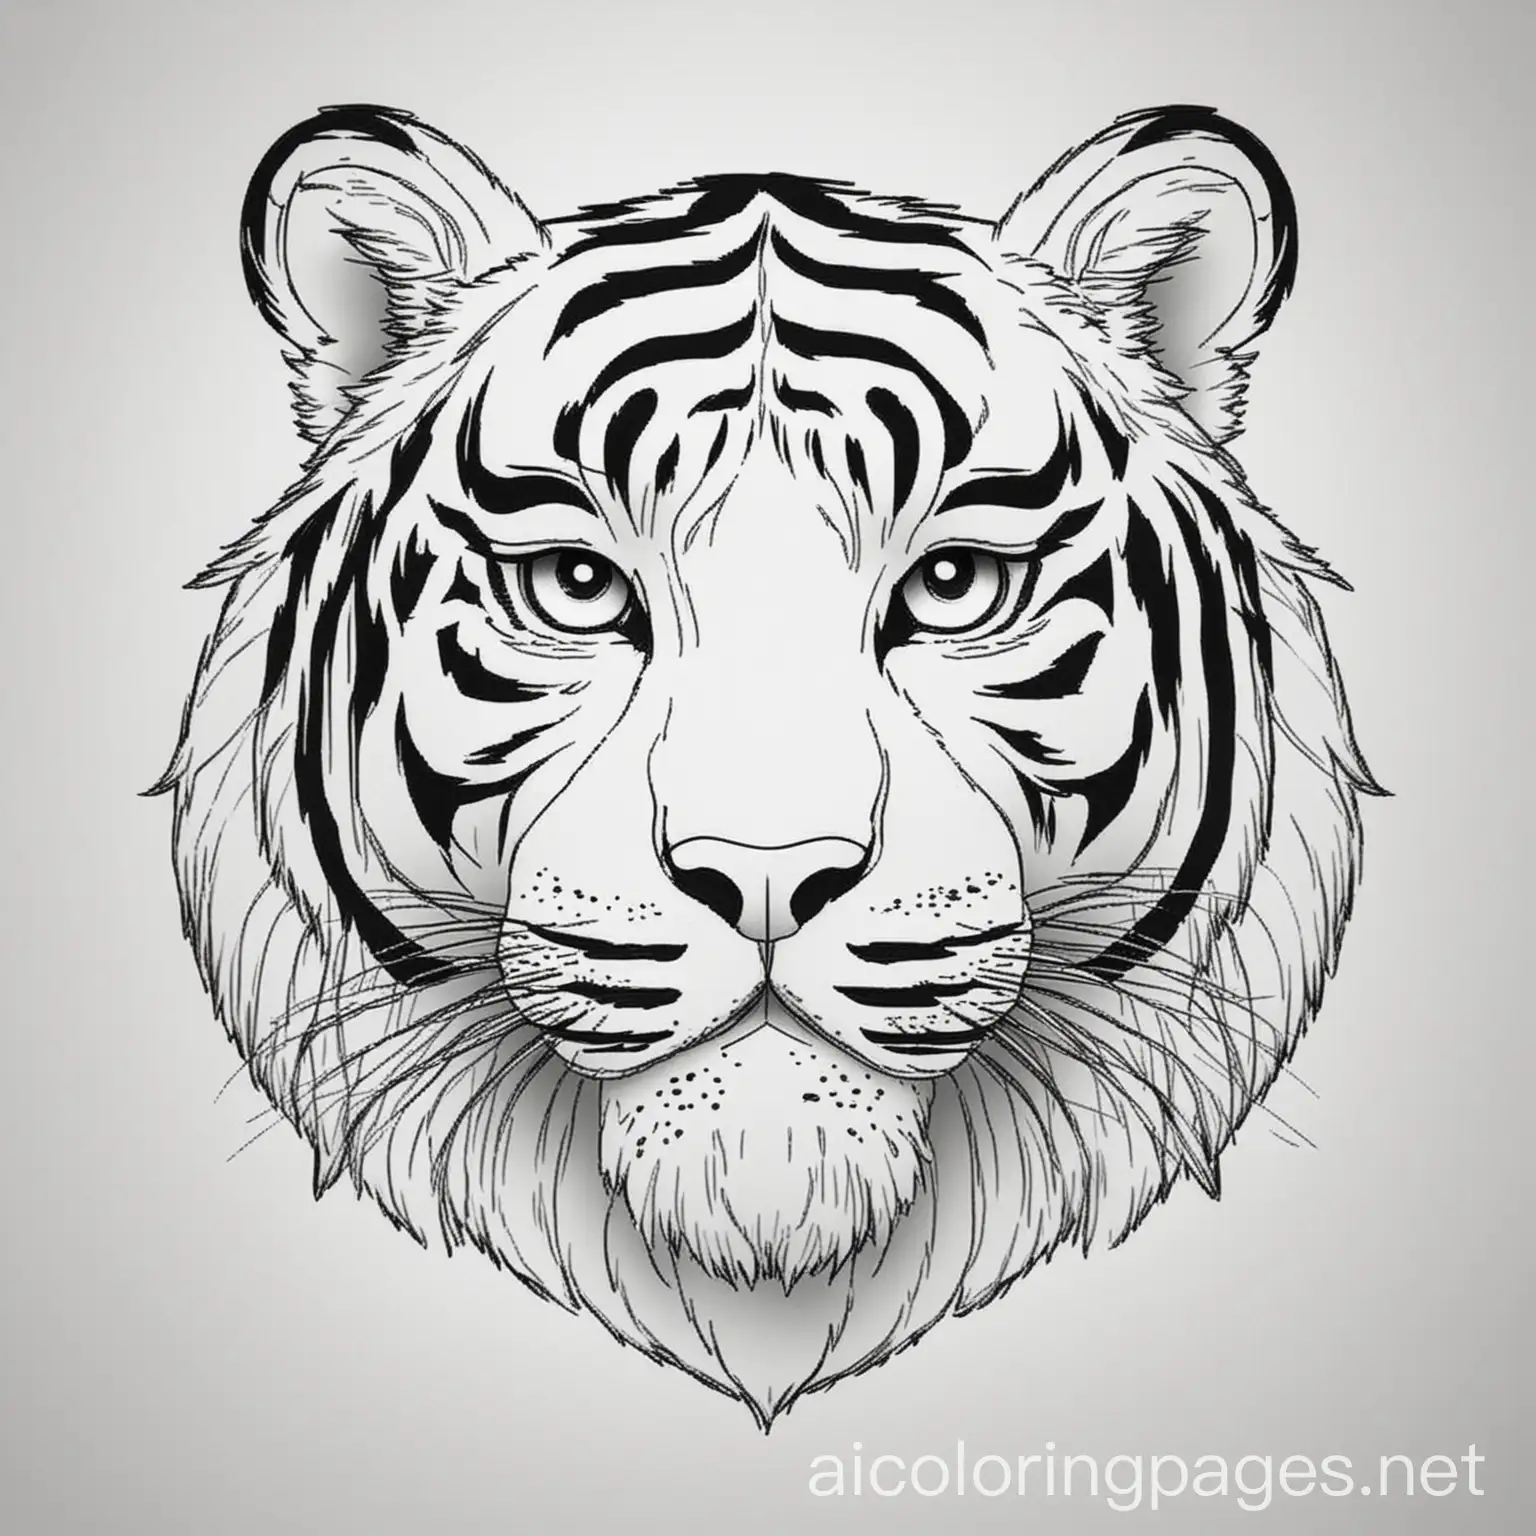 Tiger, Coloring Page, black and white, line art, white background, Simplicity, Ample White Space. The background of the coloring page is plain white to make it easy for young children to color within the lines. The outlines of all the subjects are easy to distinguish, making it simple for kids to color without too much difficulty